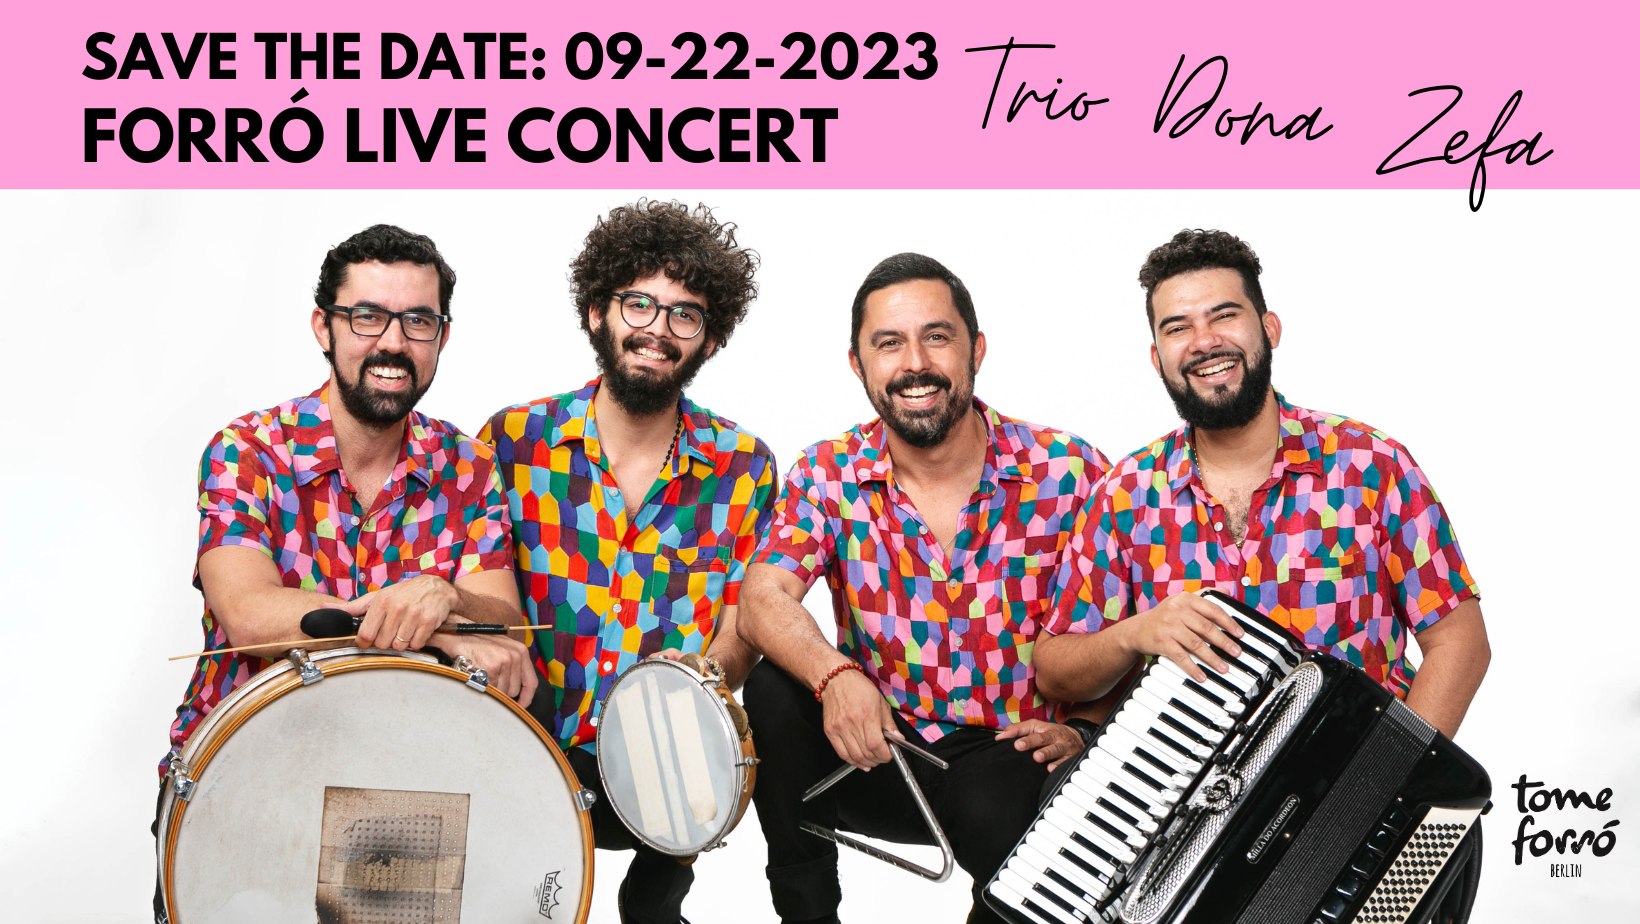 Forró Live Concert with Trio Dona Zefa